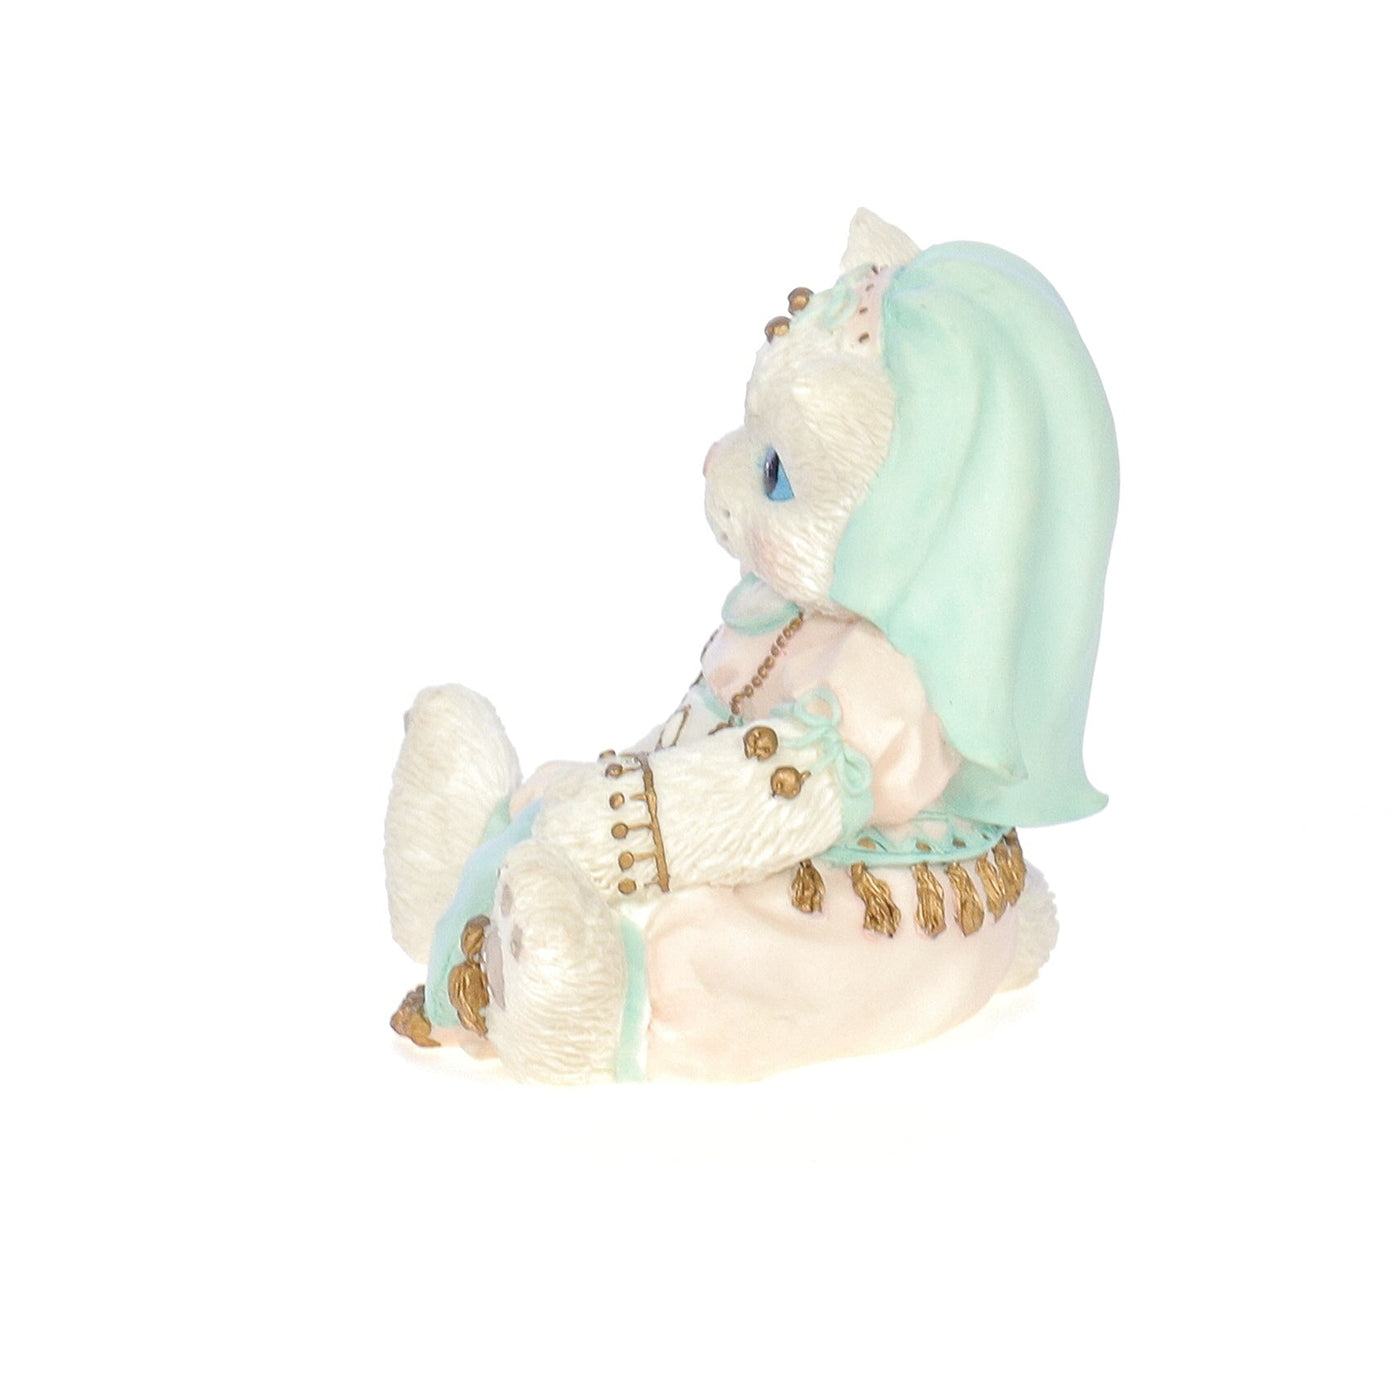 Calico_Kittens_Friendship_Has_Many_Riches_Friendship_Figurine_1994